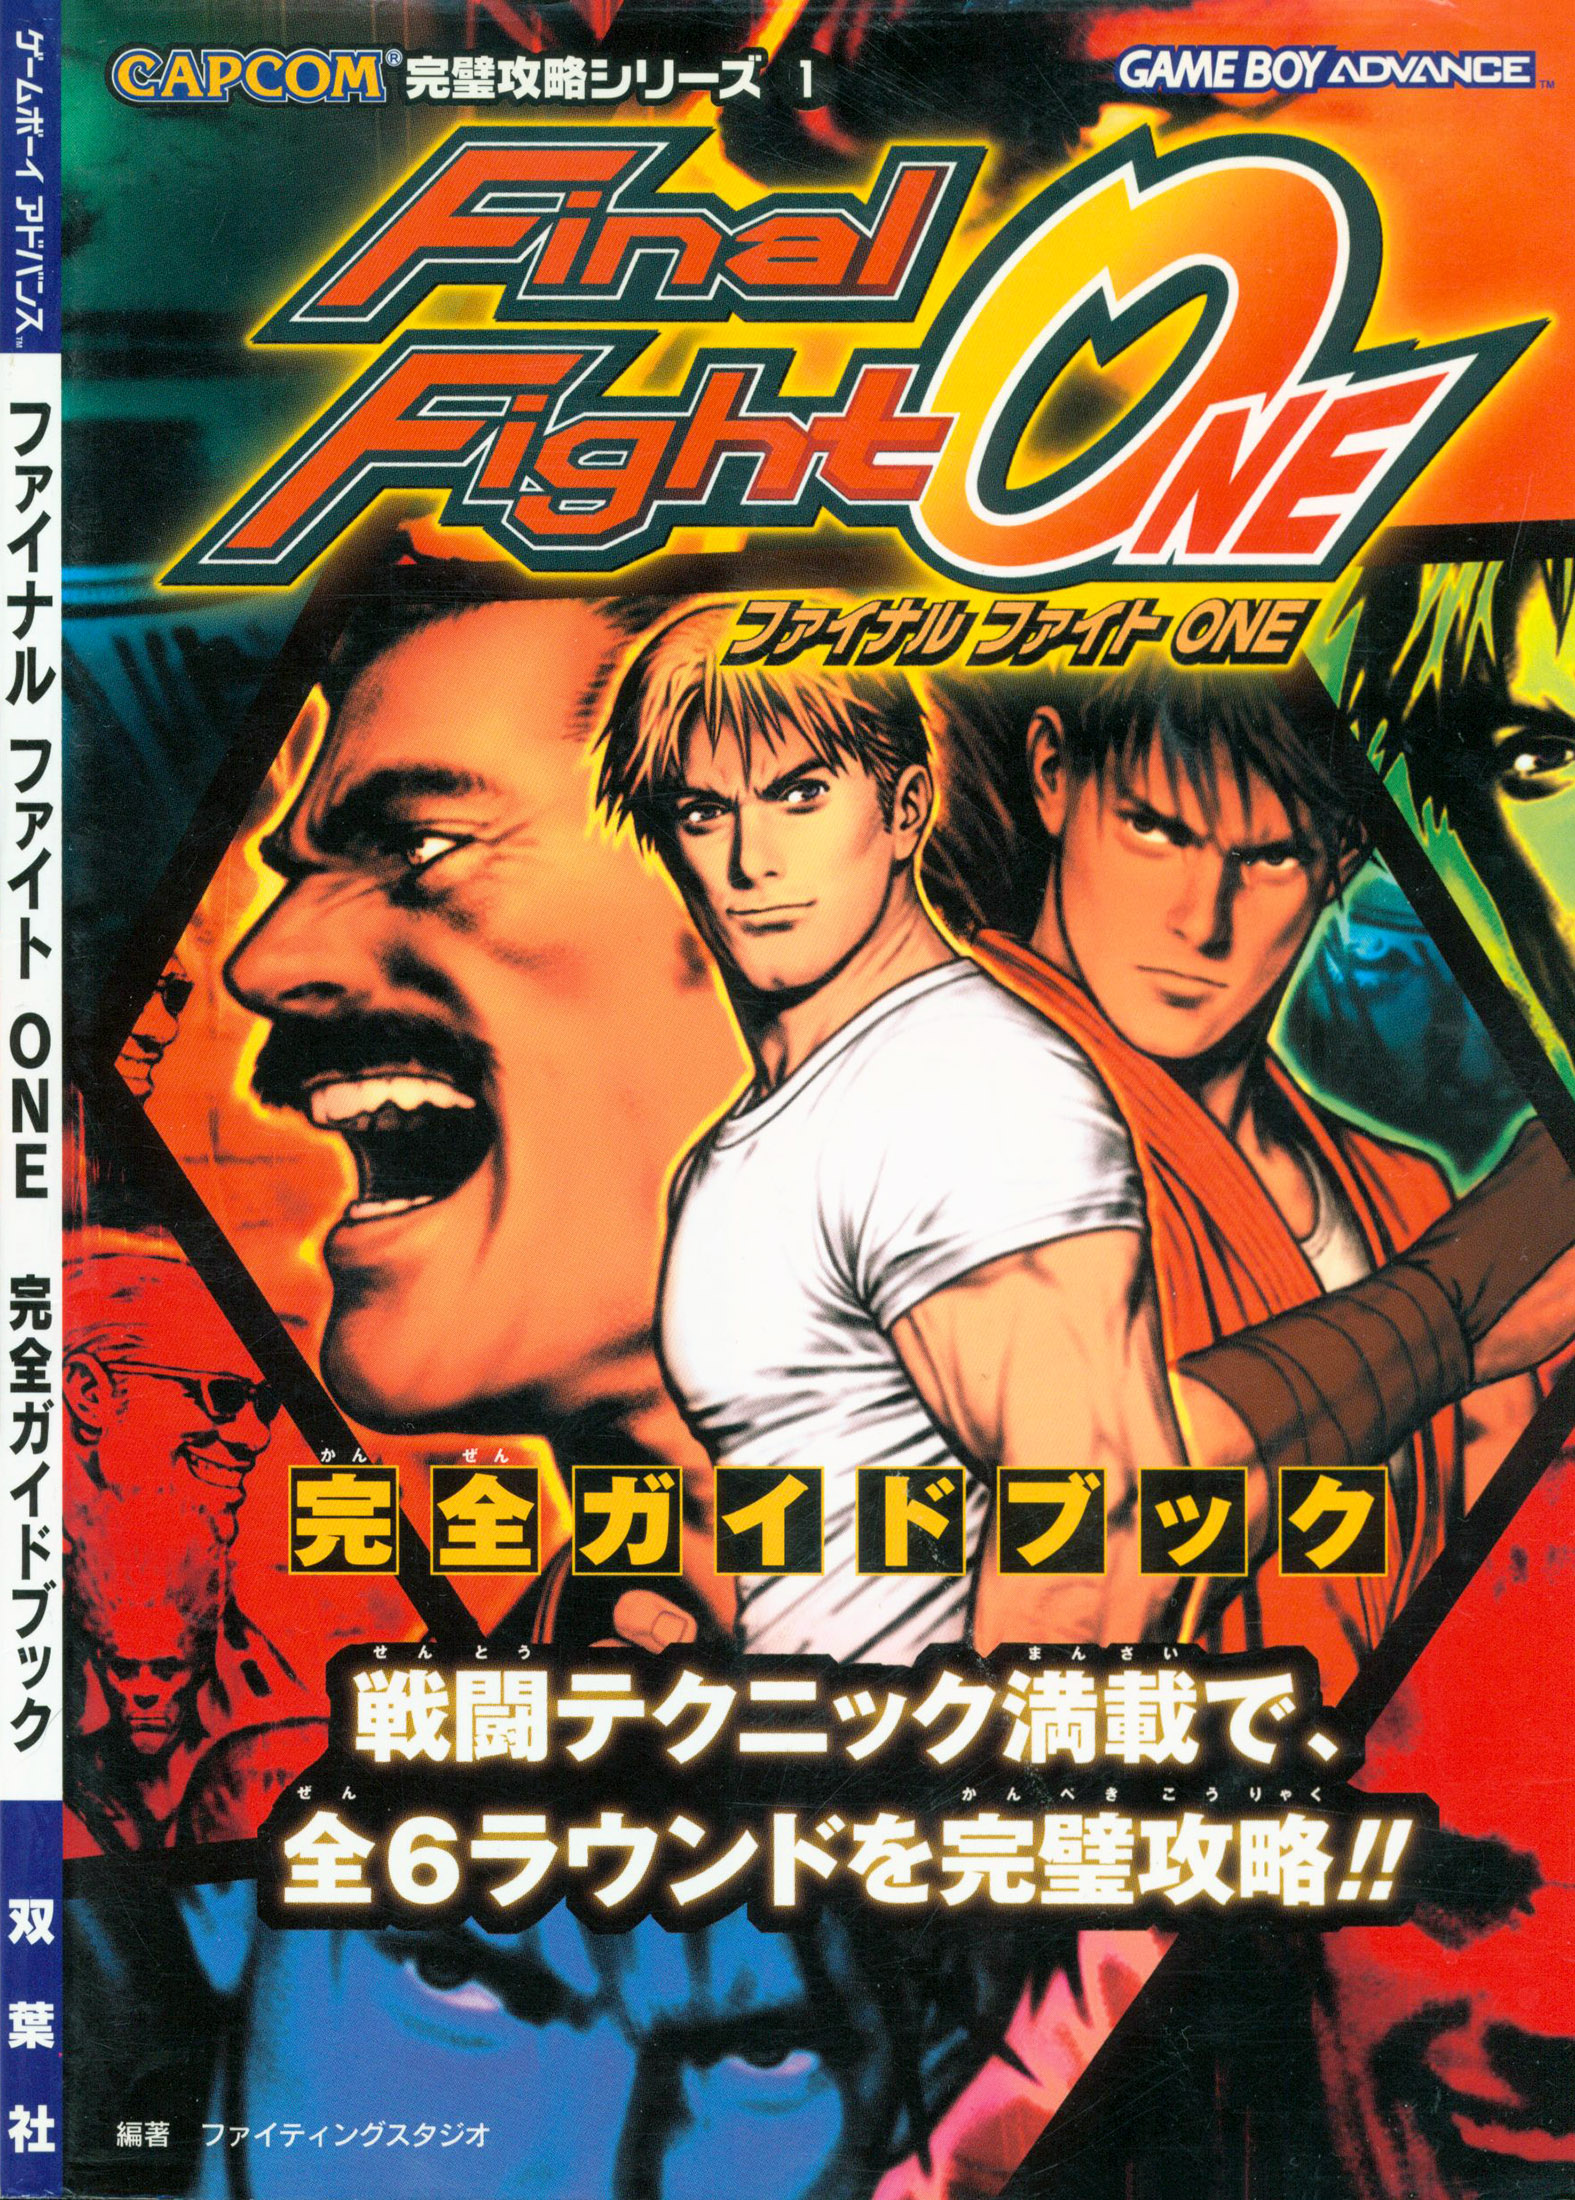 Final Fight One - Complete Guide Book - Japanese Language Guides